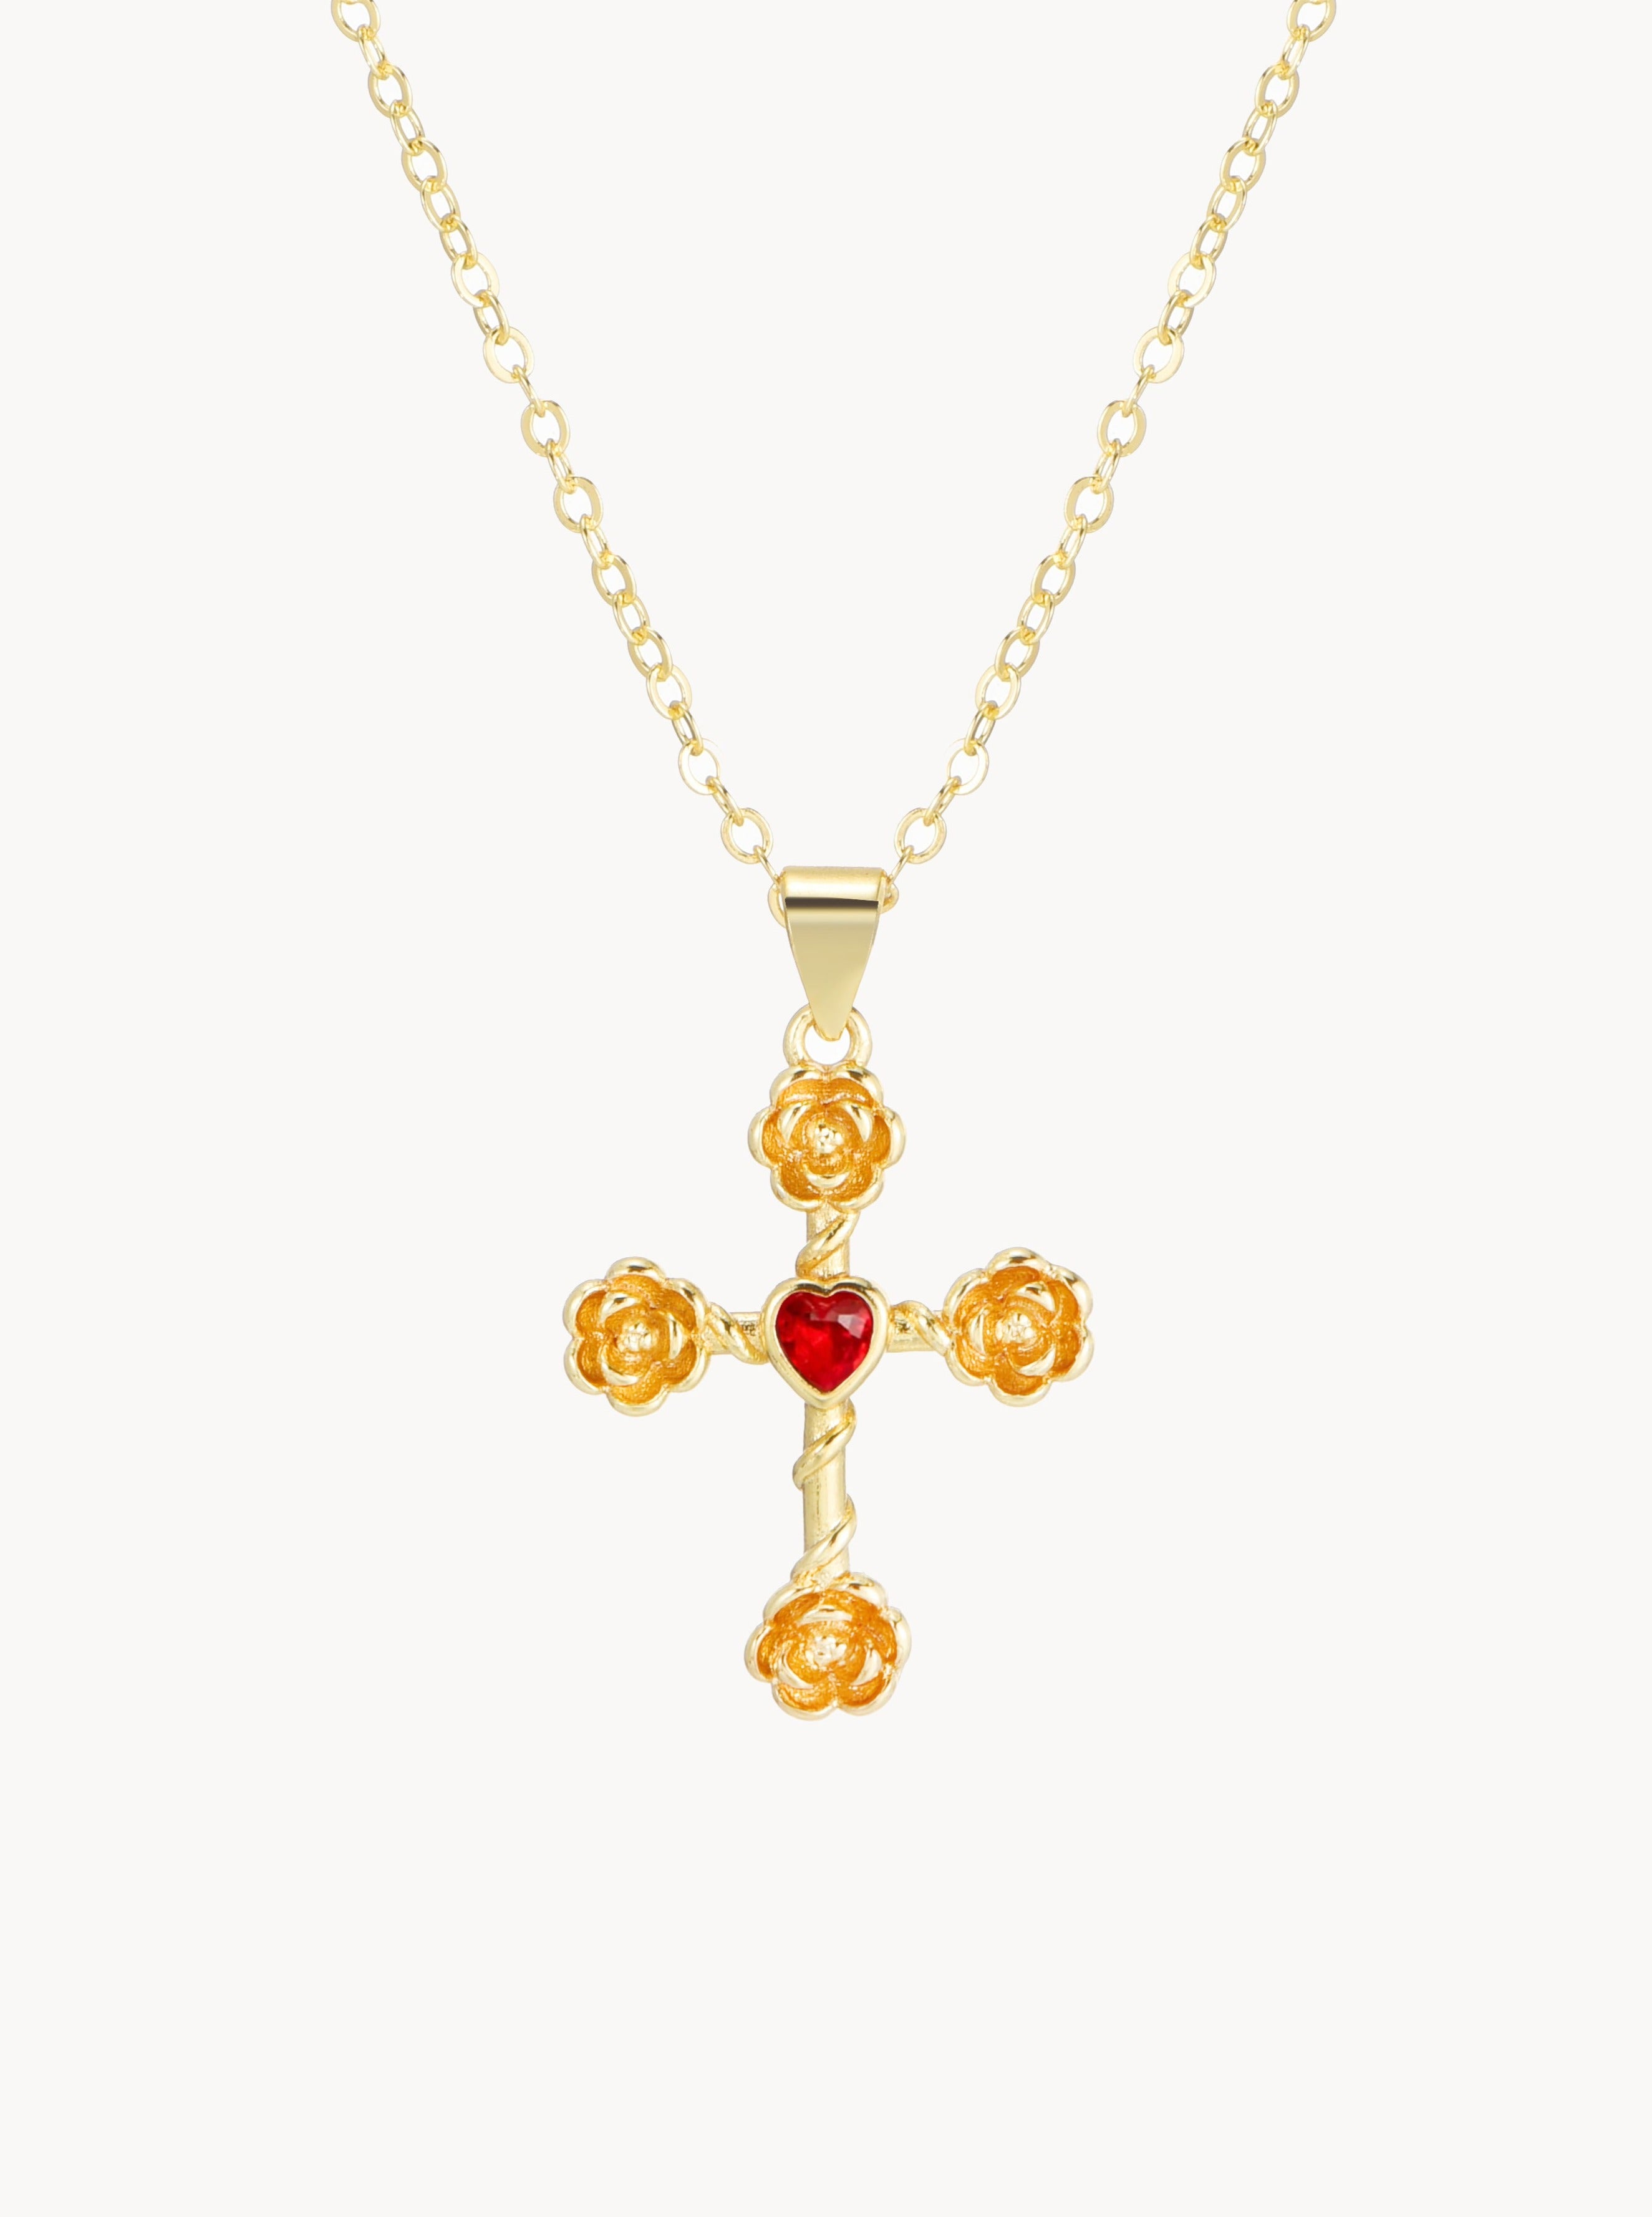 Marian Rose Heart Necklace